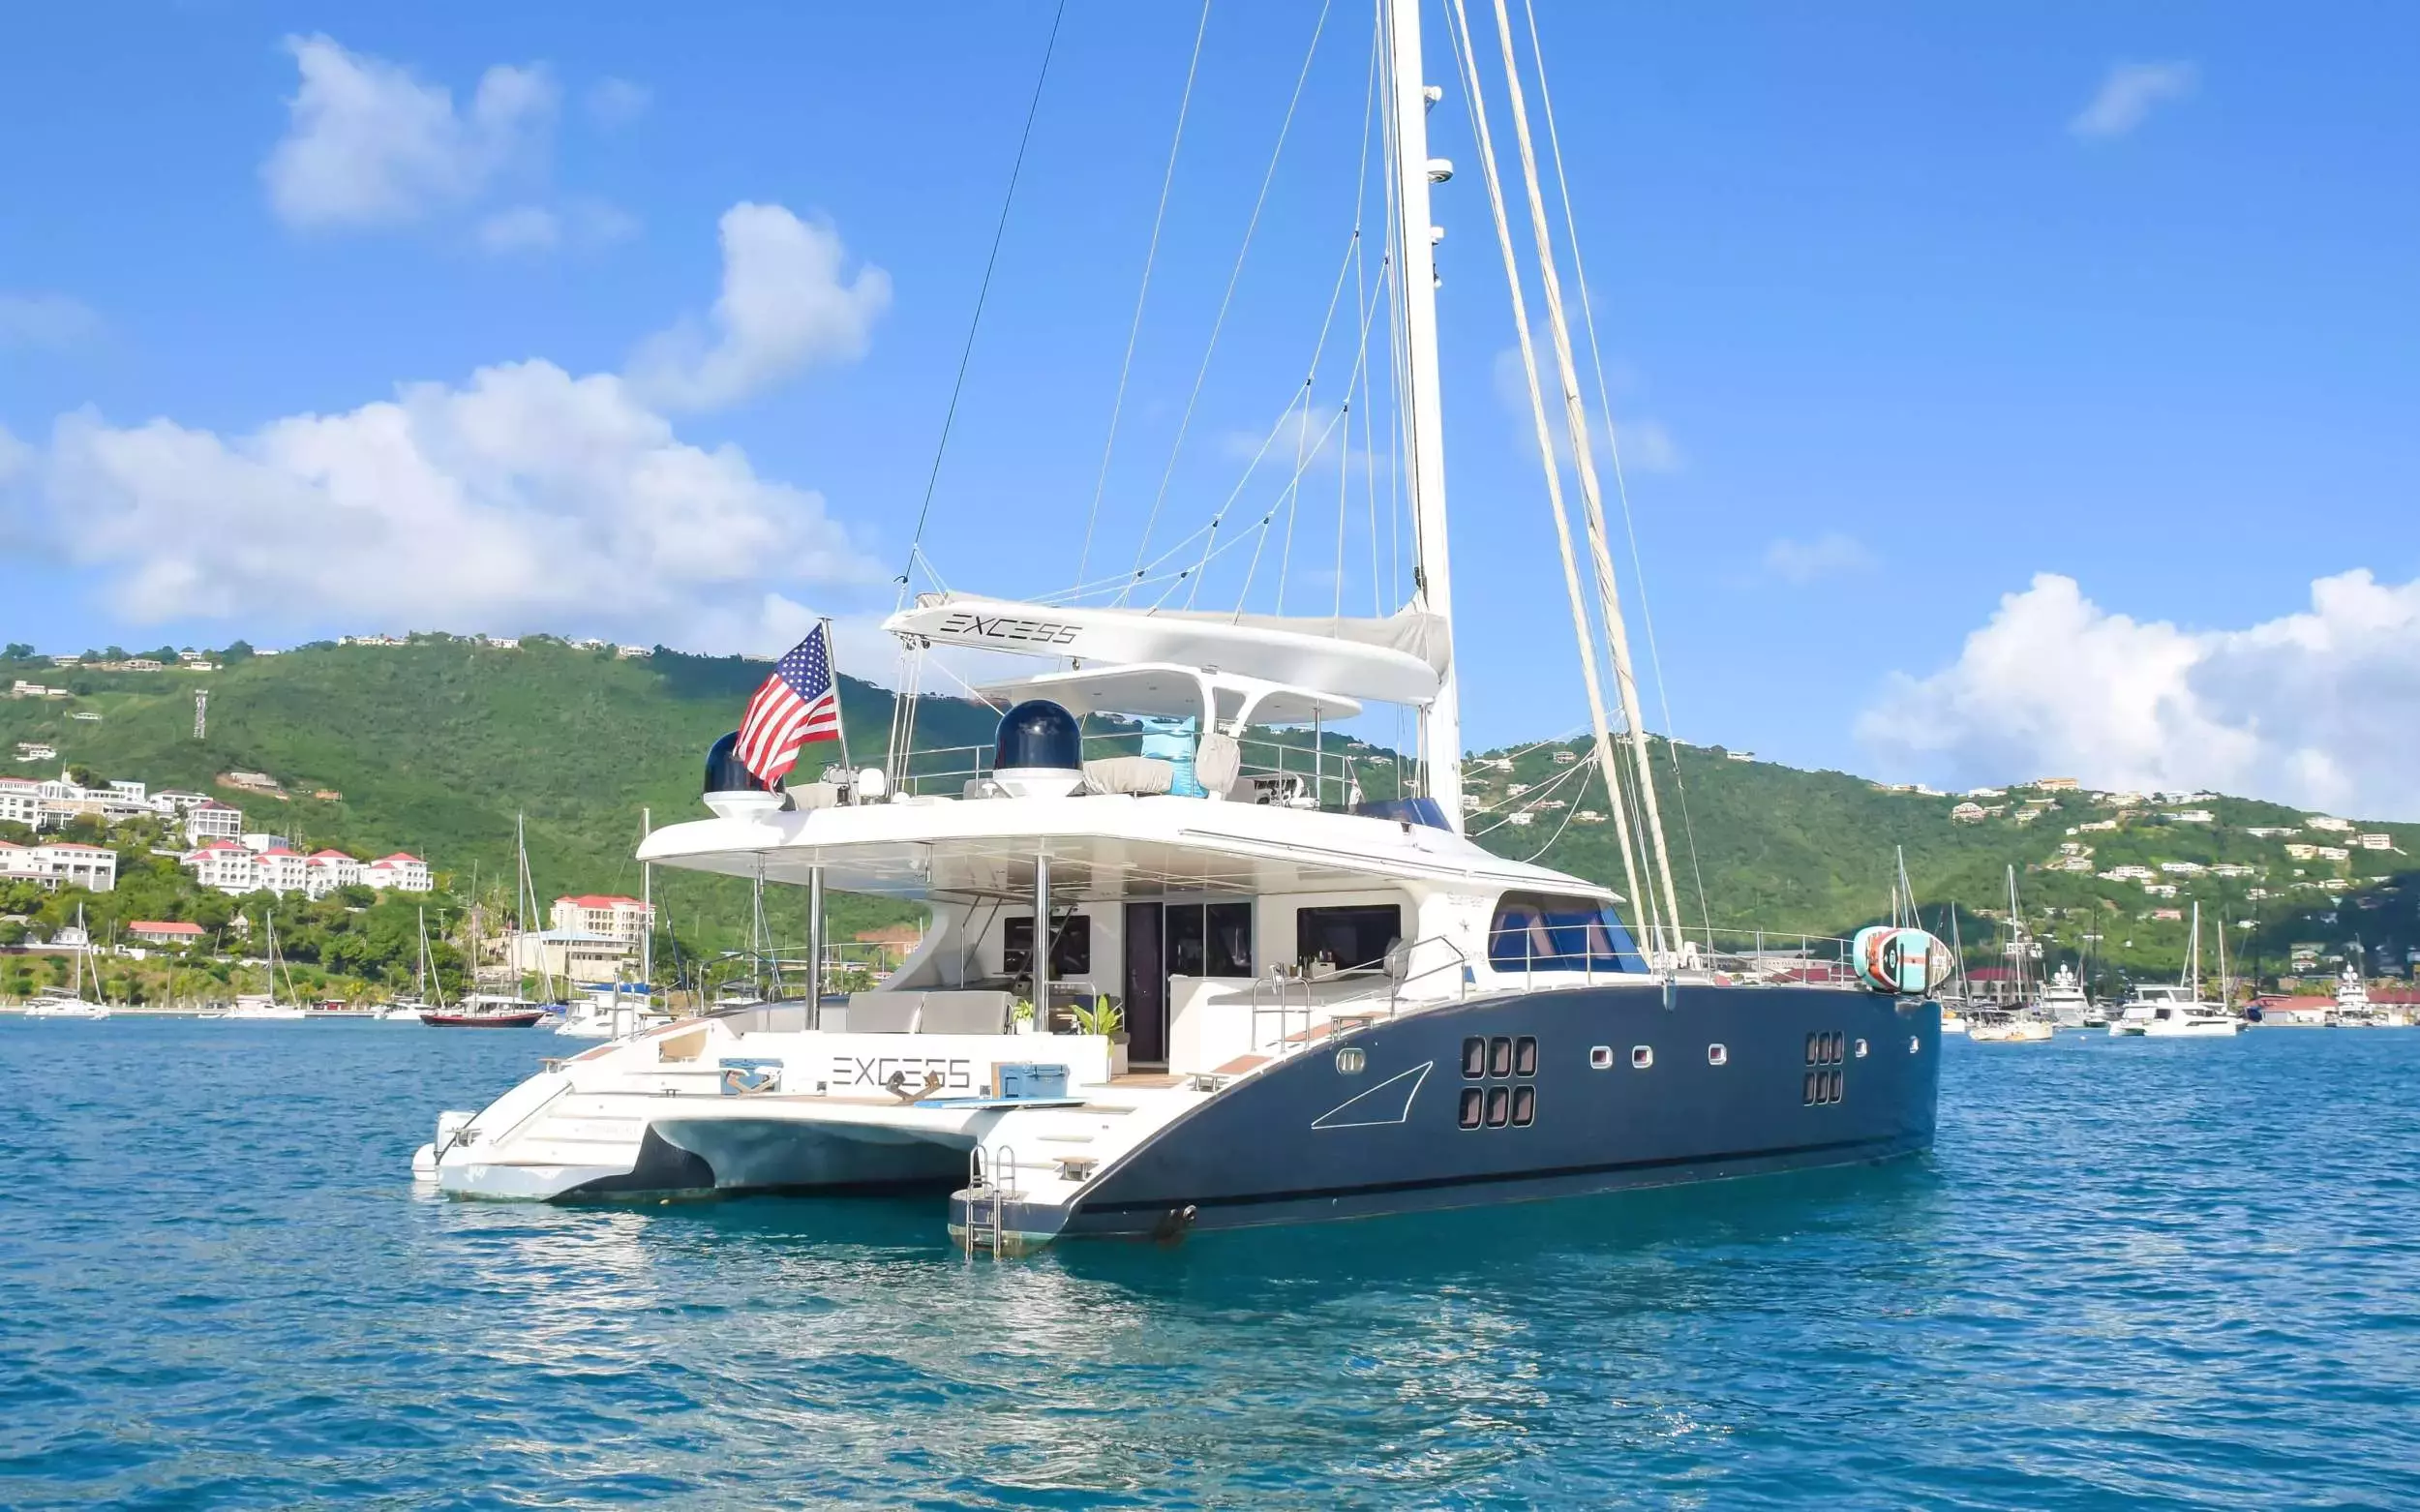 Excess by Sunreef Yachts - Top rates for a Charter of a private Luxury Catamaran in US Virgin Islands